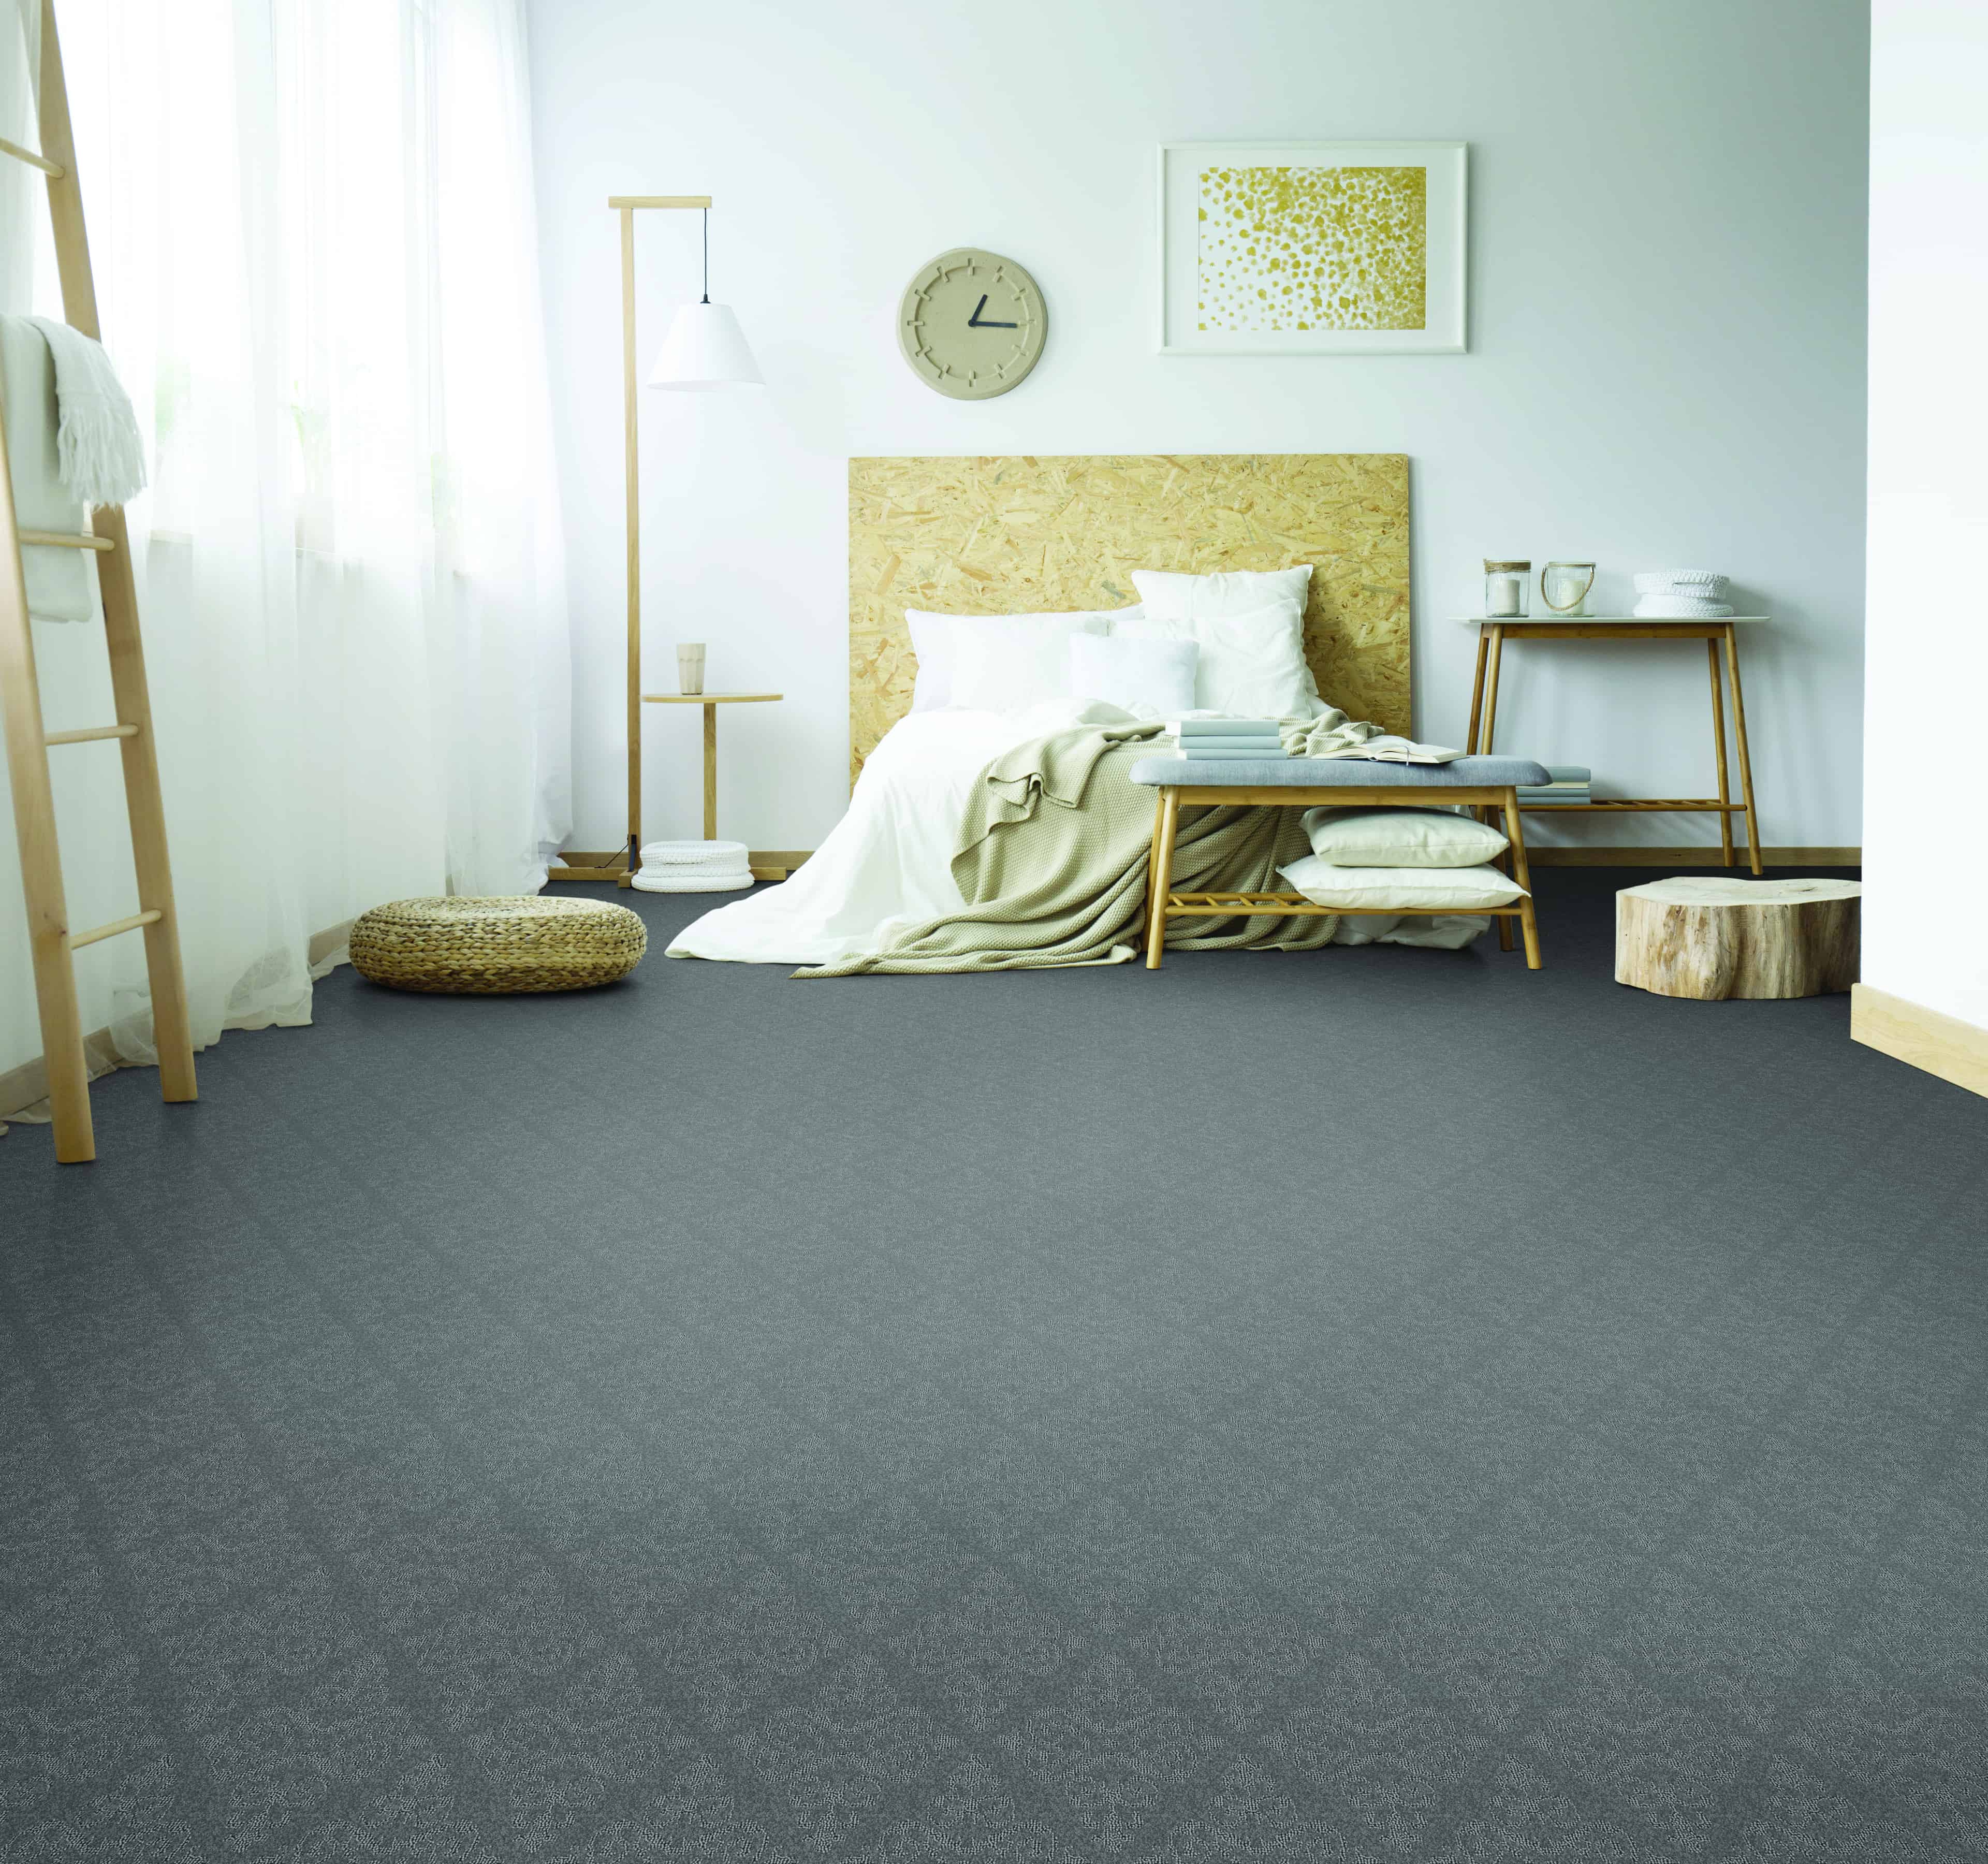 Medium grey Pet Protect Carpet by Husky Carpet in a bedroom with white walls and light wood furniture.